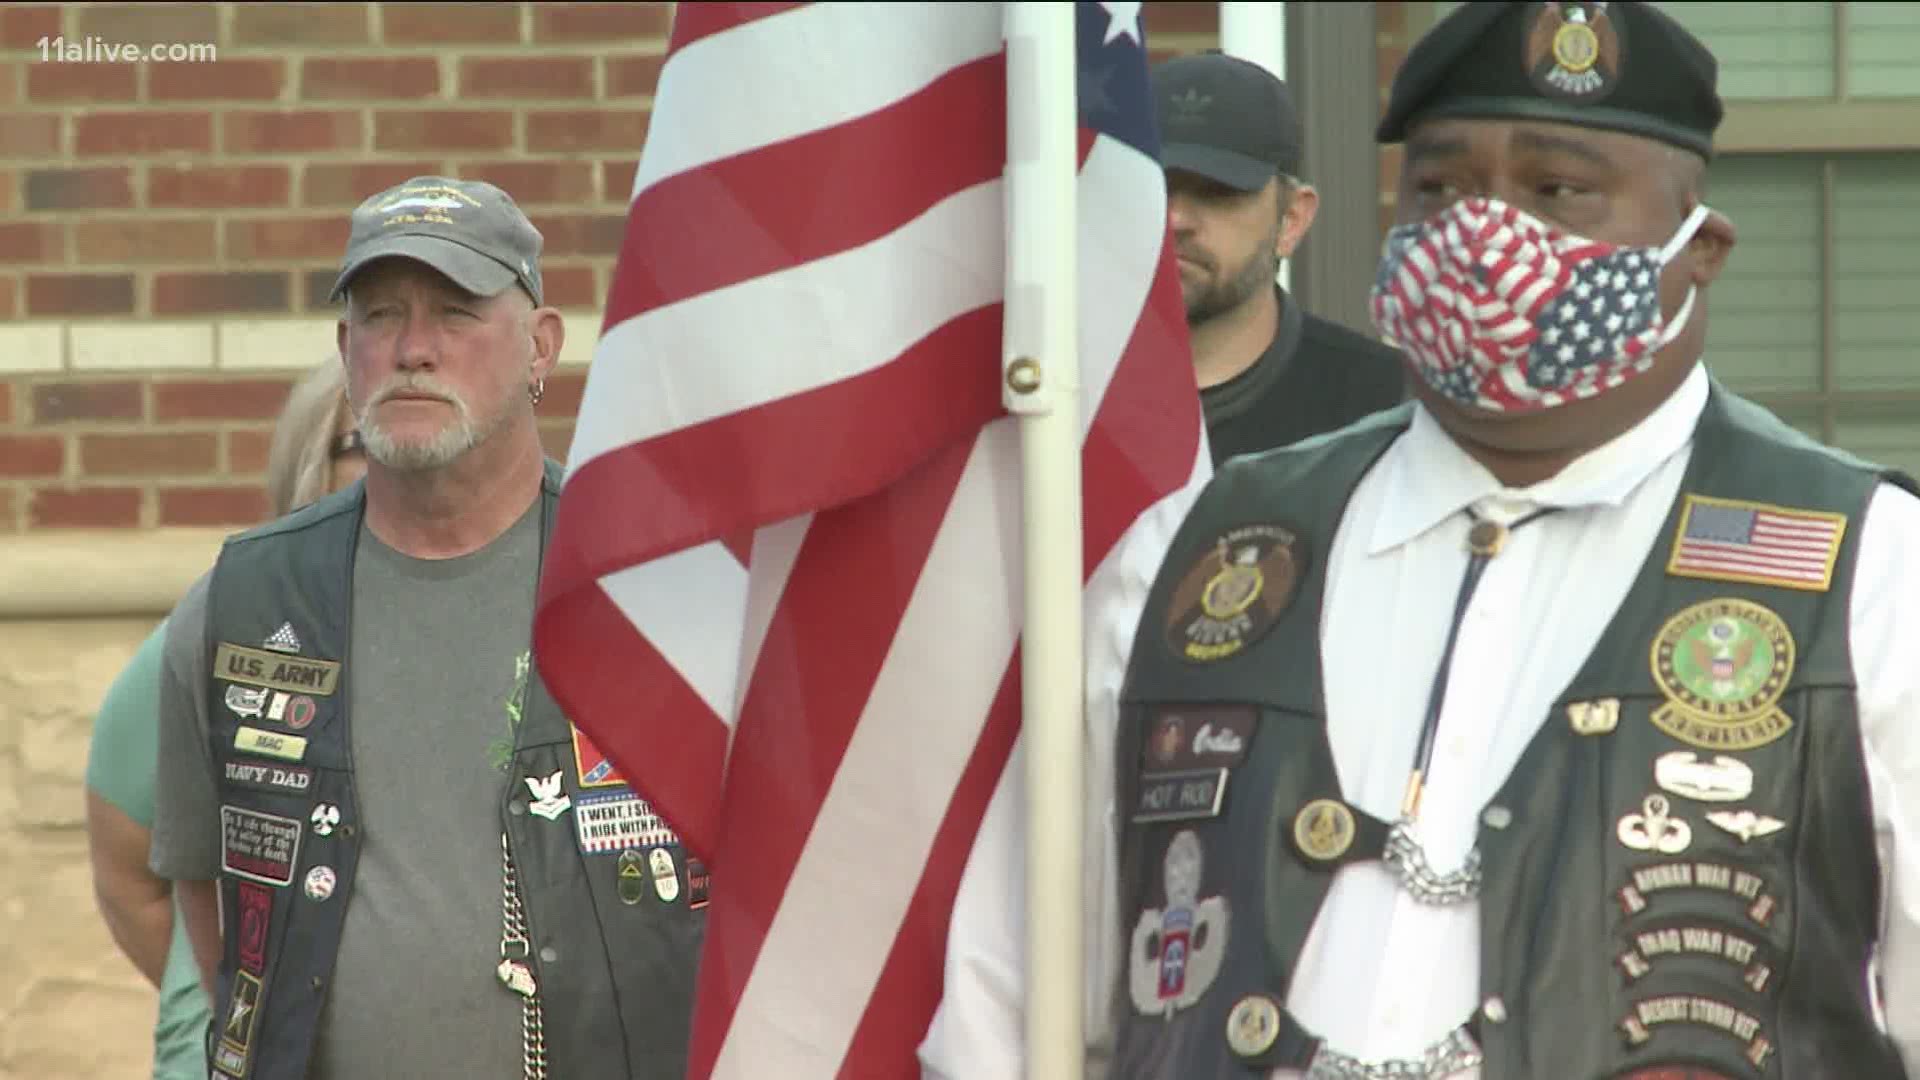 The Georgia National Guard provided salutes by air in two parts of the state, while other memorials looked different, with some wearing masks and social distancing.